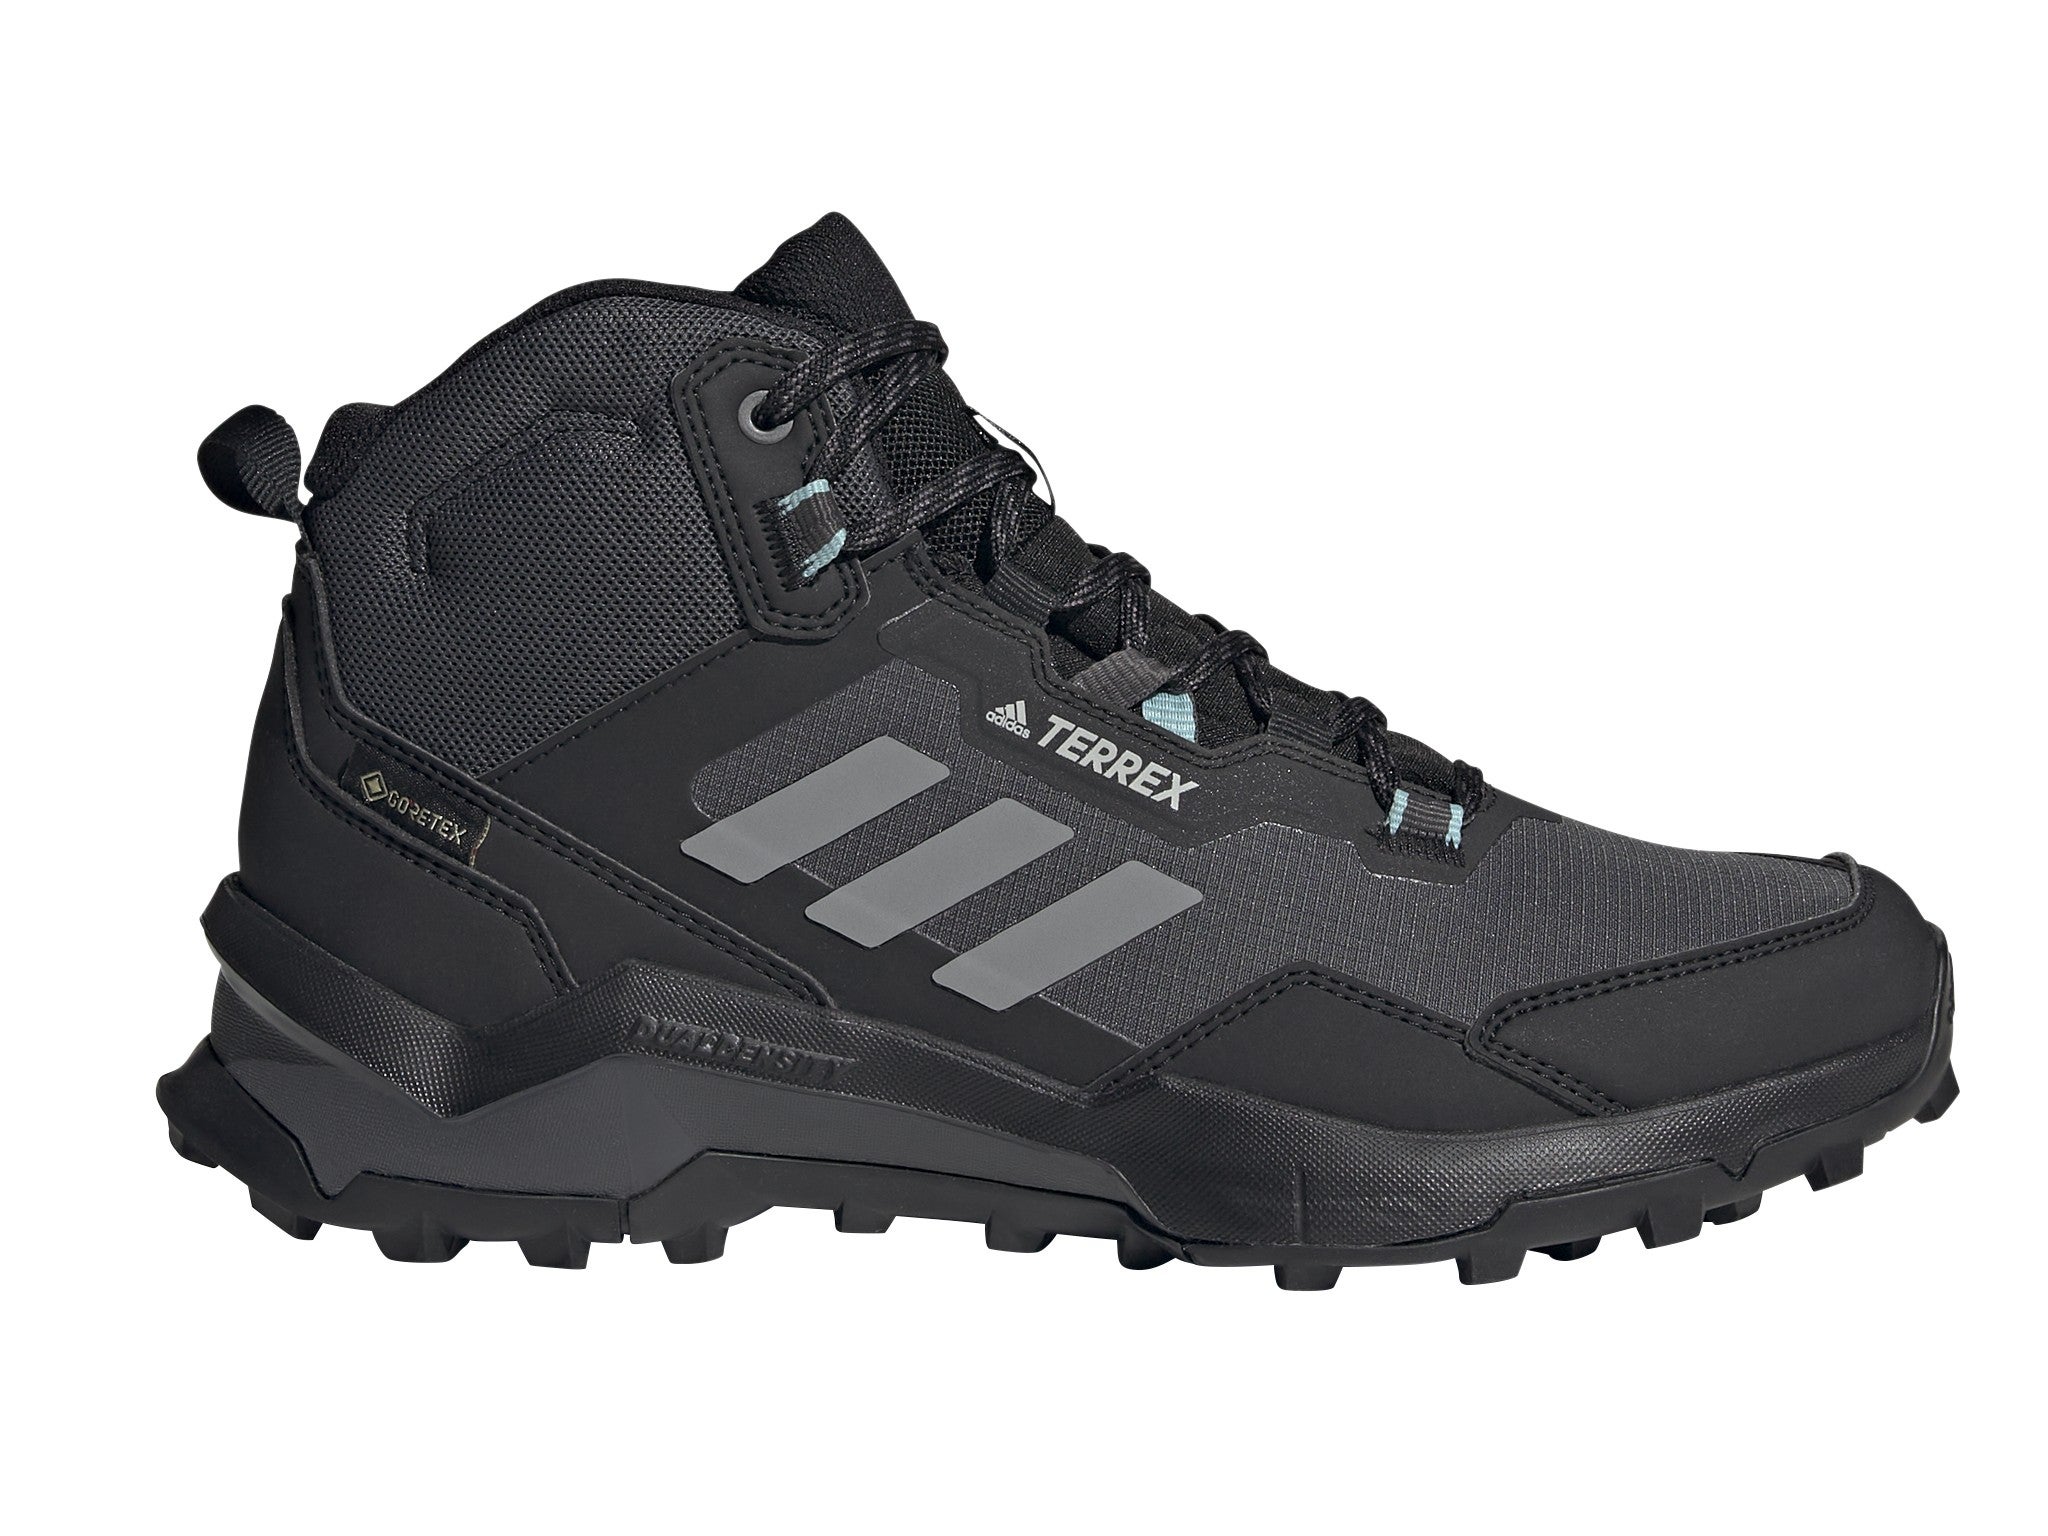 Adidas terrex AX4 gore-tex hiking shoes indybest